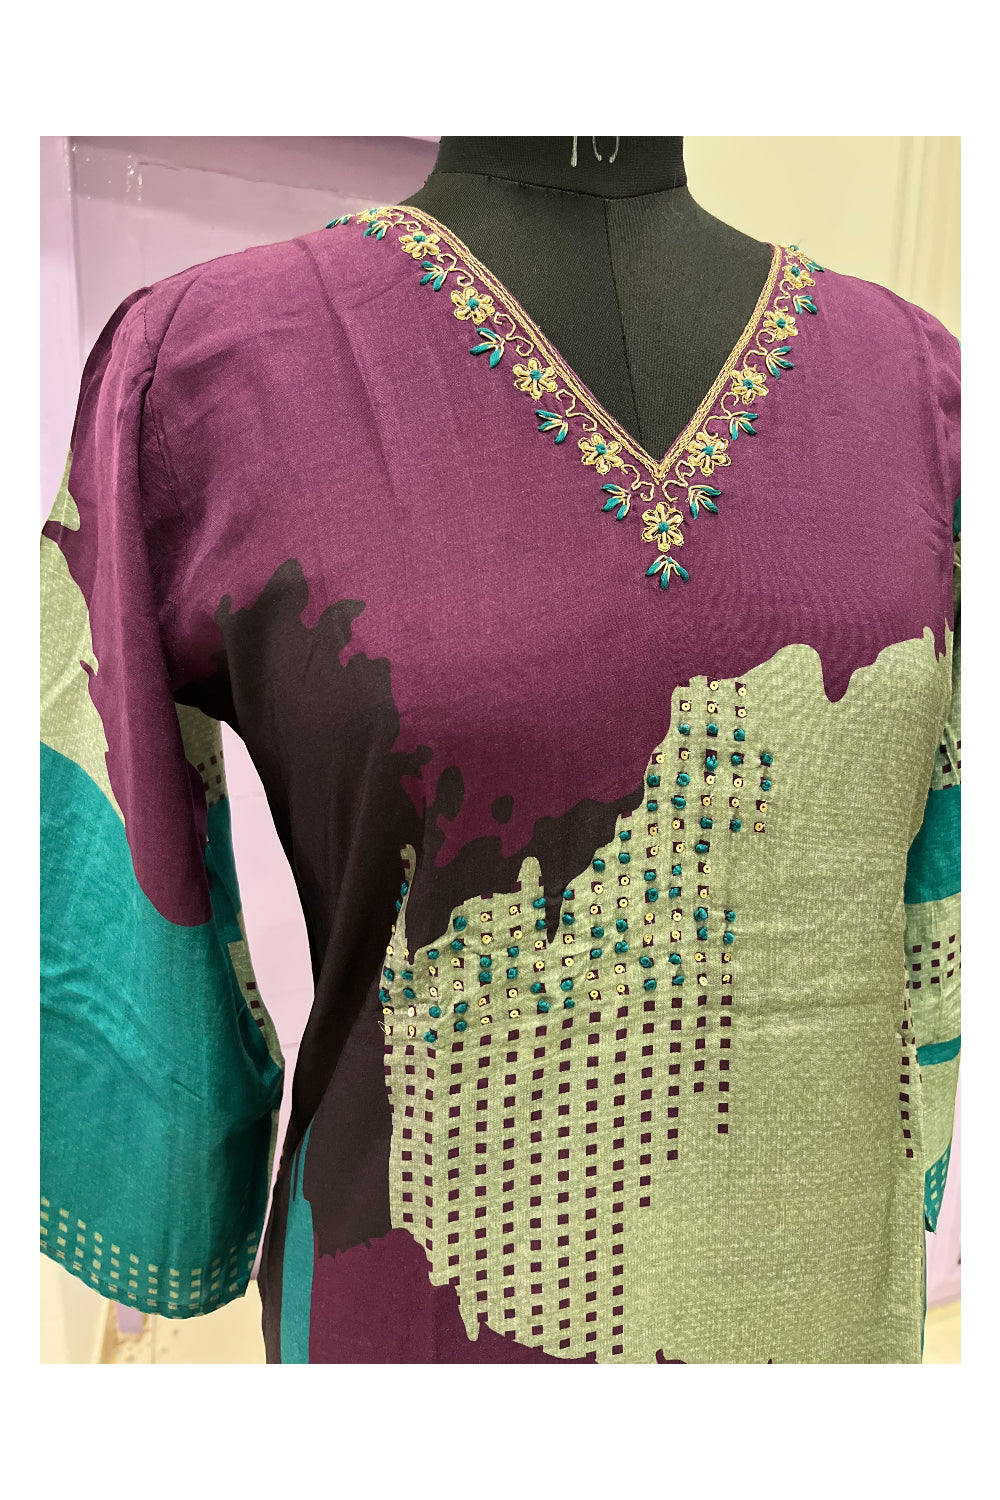 Southloom Stitched Semi Silk Salwar Set in Purple Green Printed and Sequins Designs